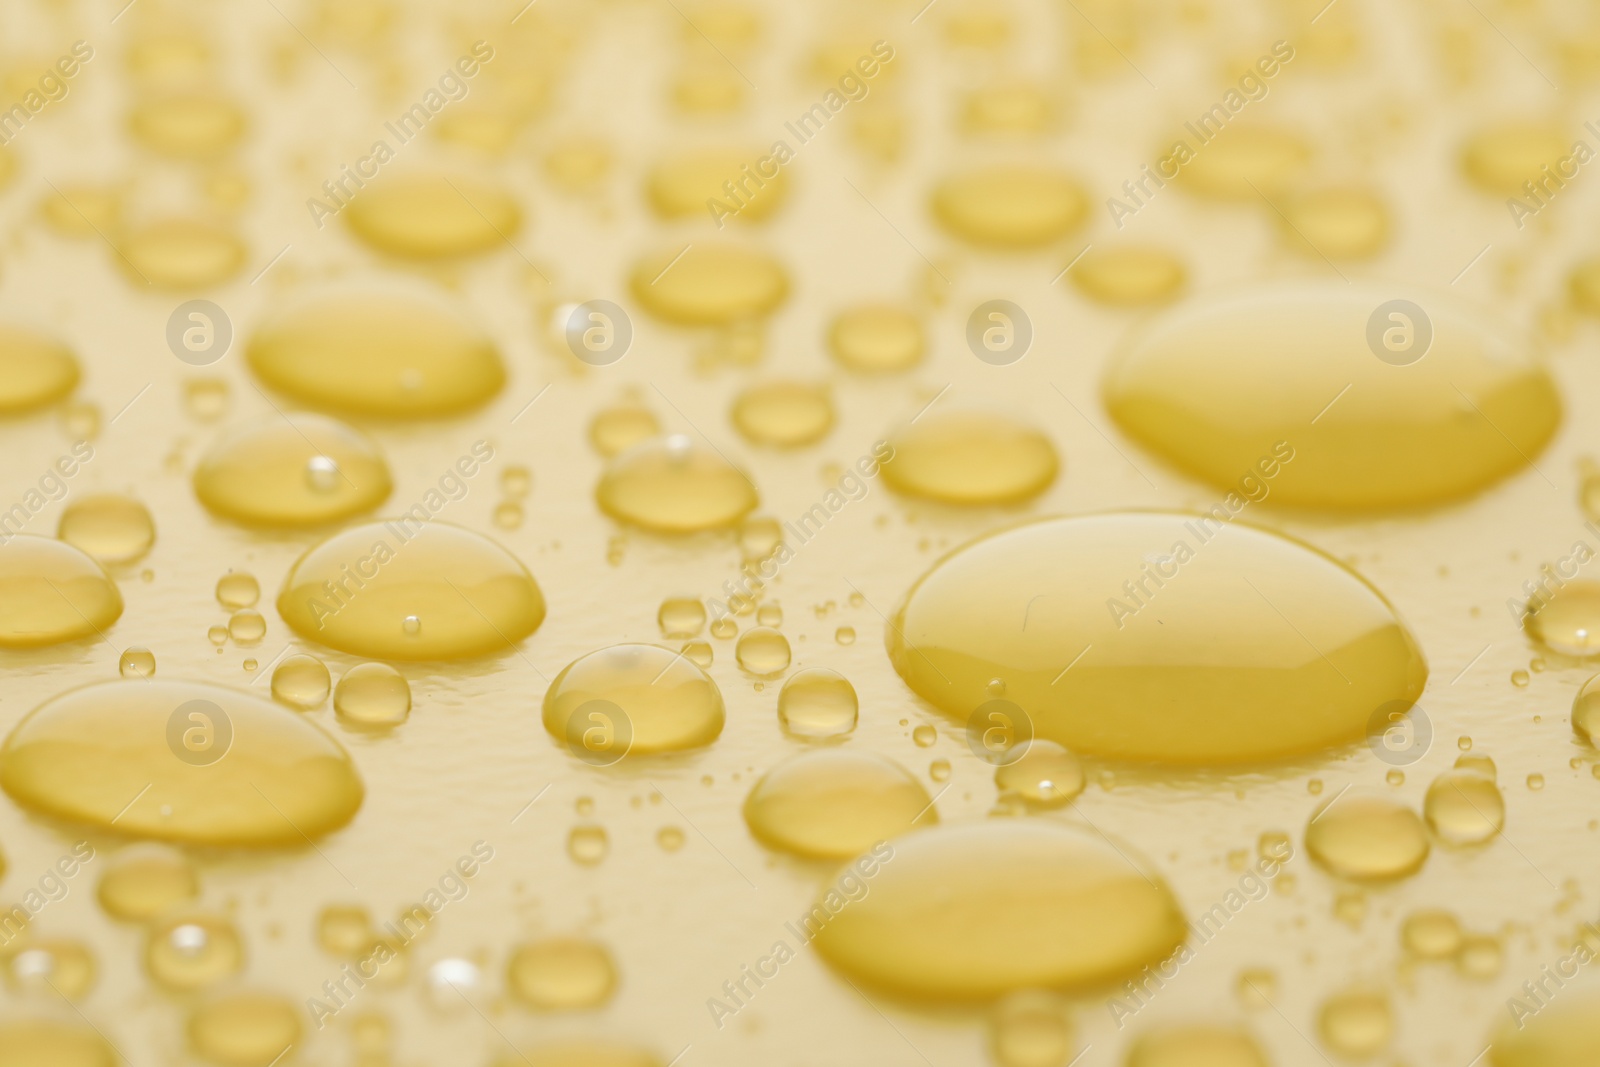 Photo of Water drops on yellow background, closeup view